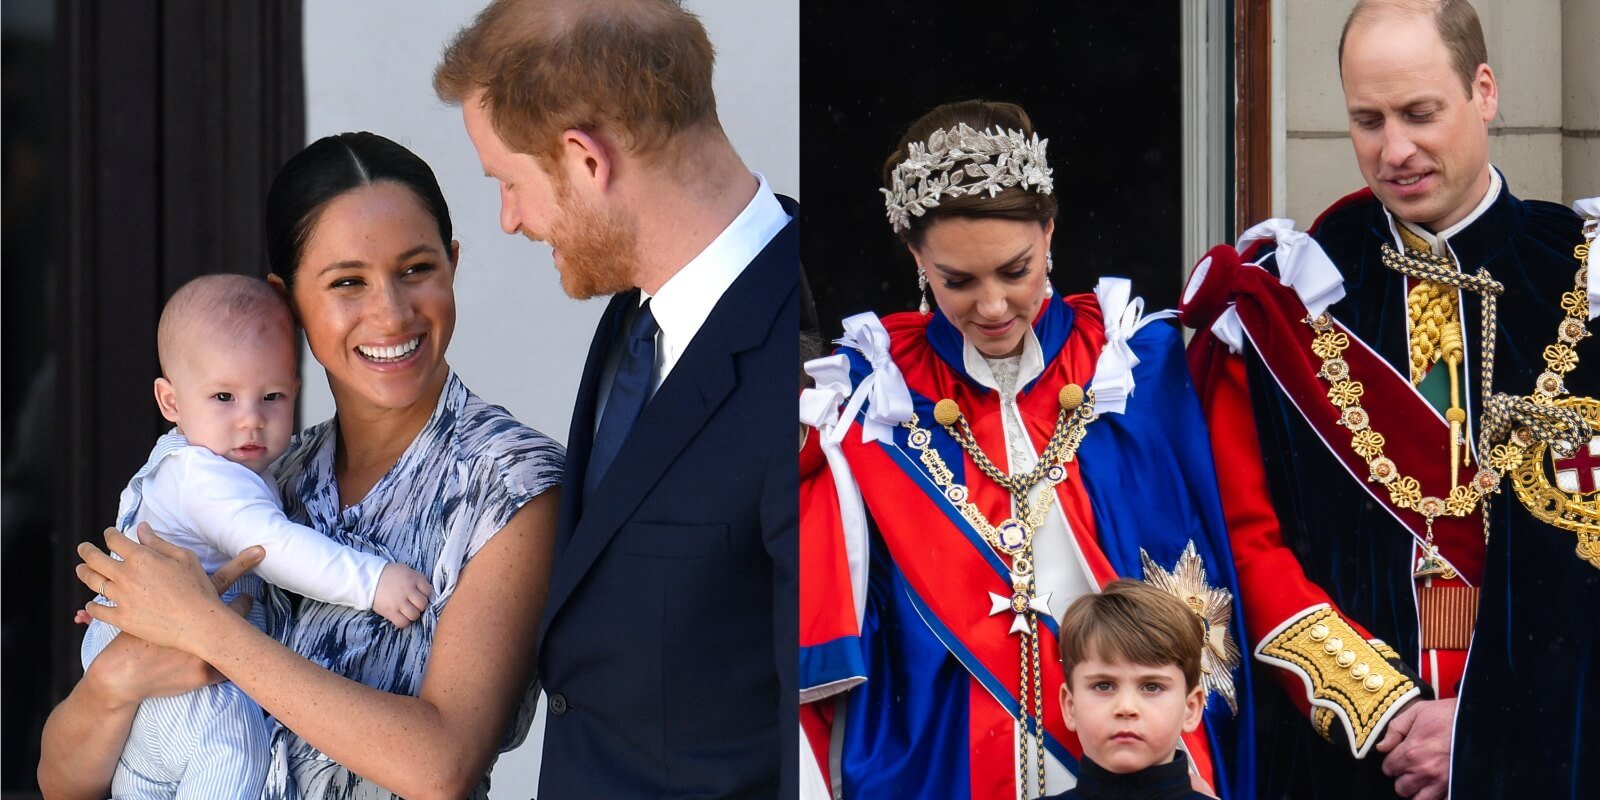 Meghan Markle, Prince Harry, Prince Archie, Kate Middleton, Prince Louis and Prince William in side by side photographs.